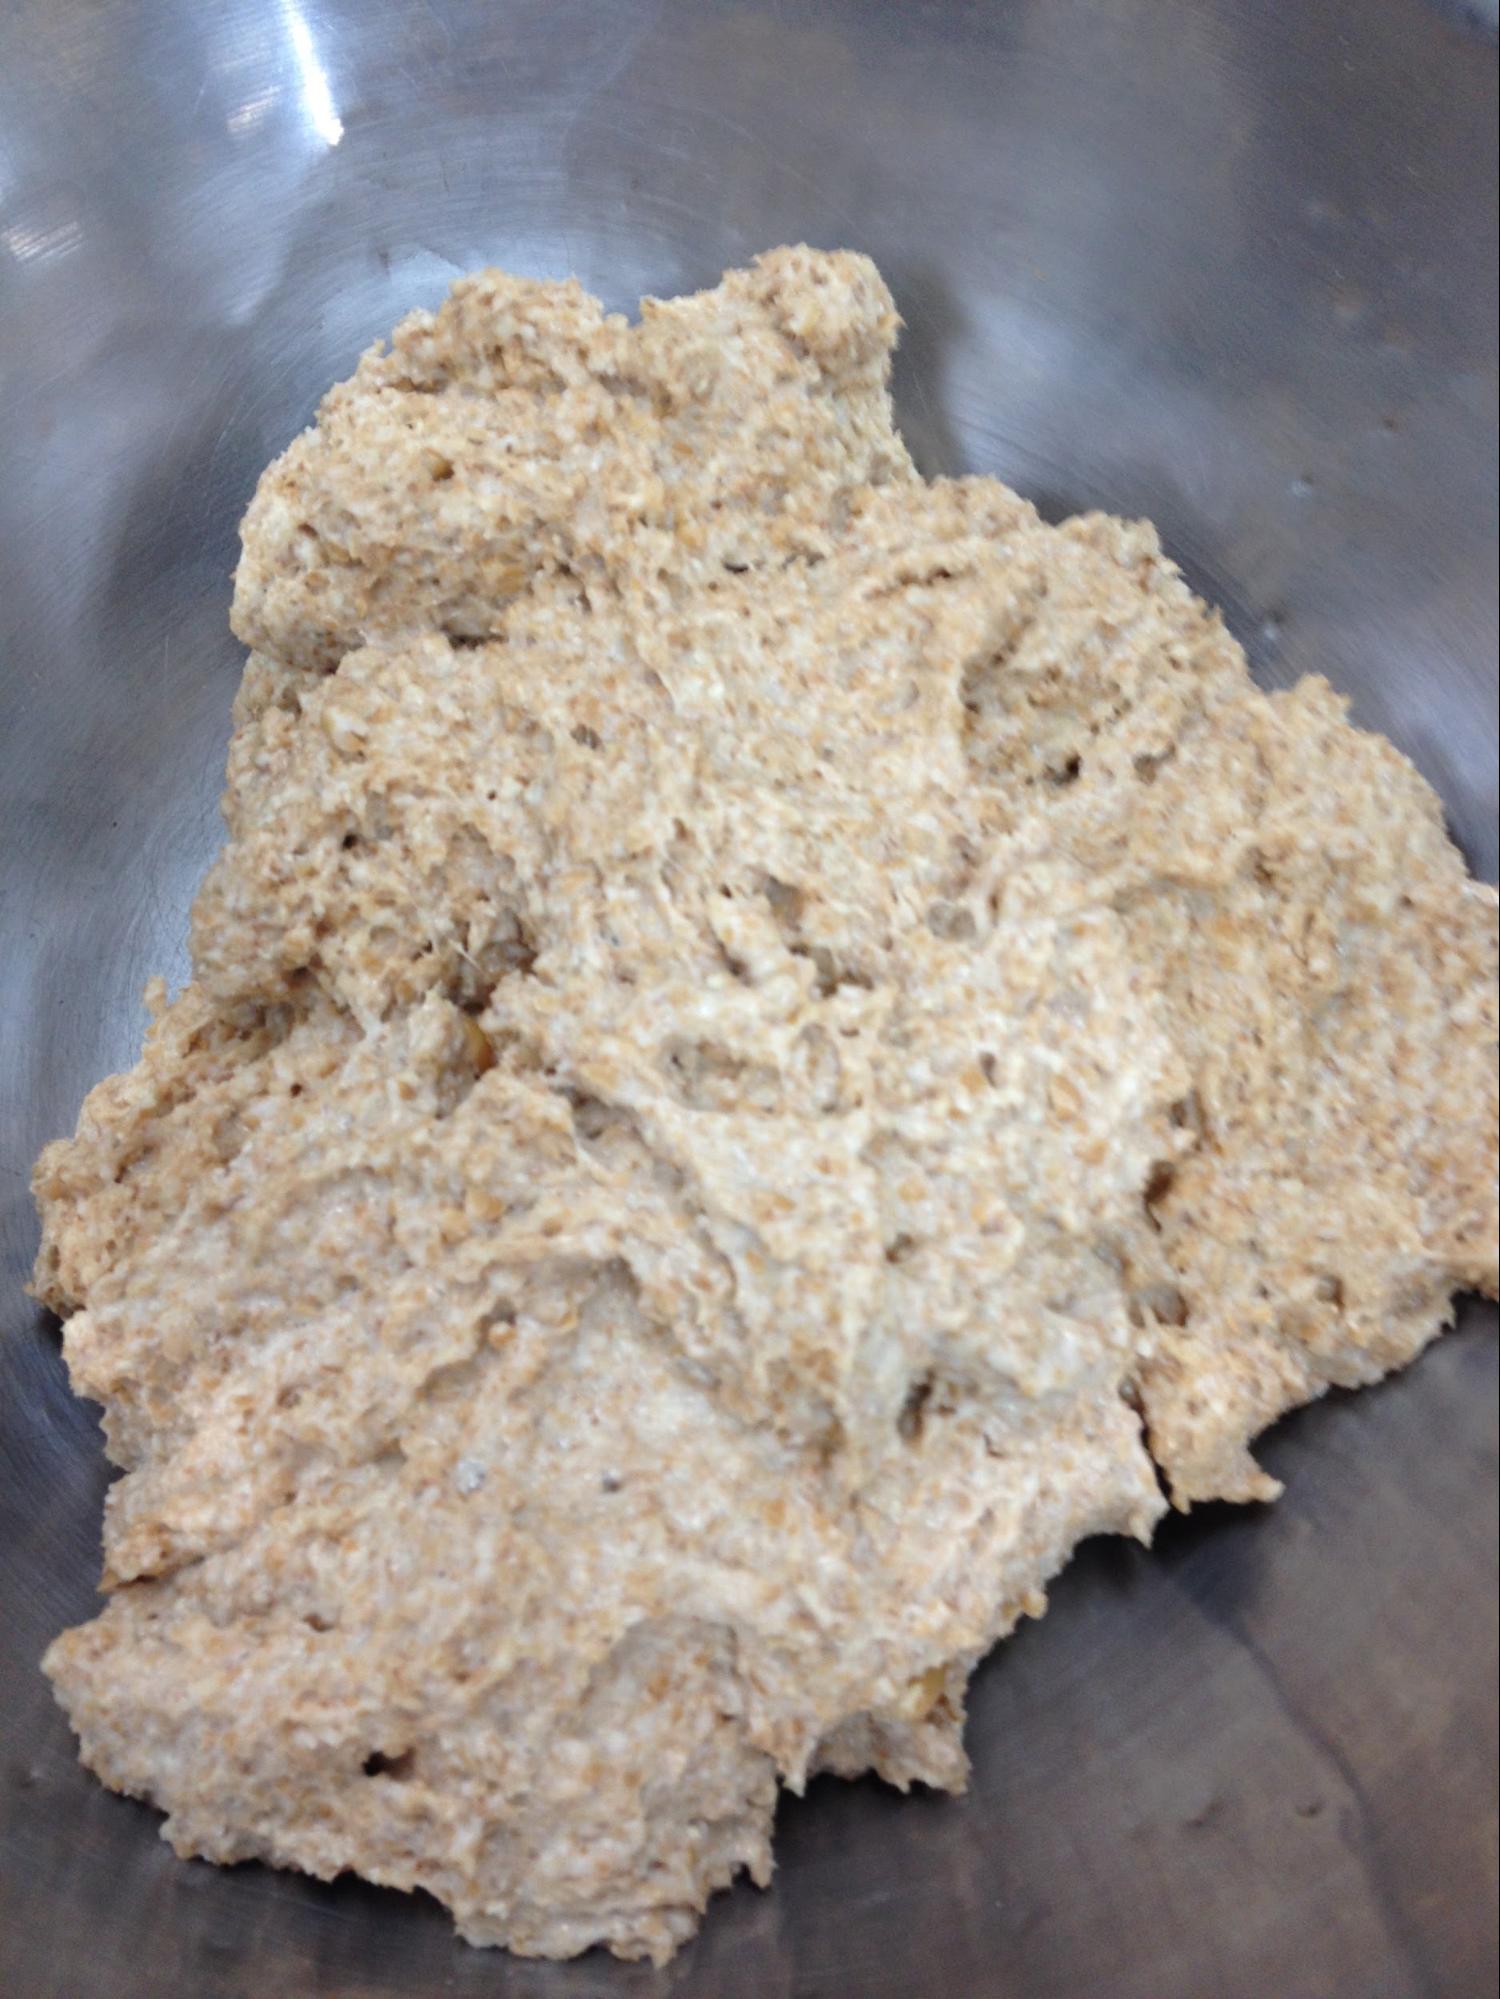 sprouted grains mash bread nutrition